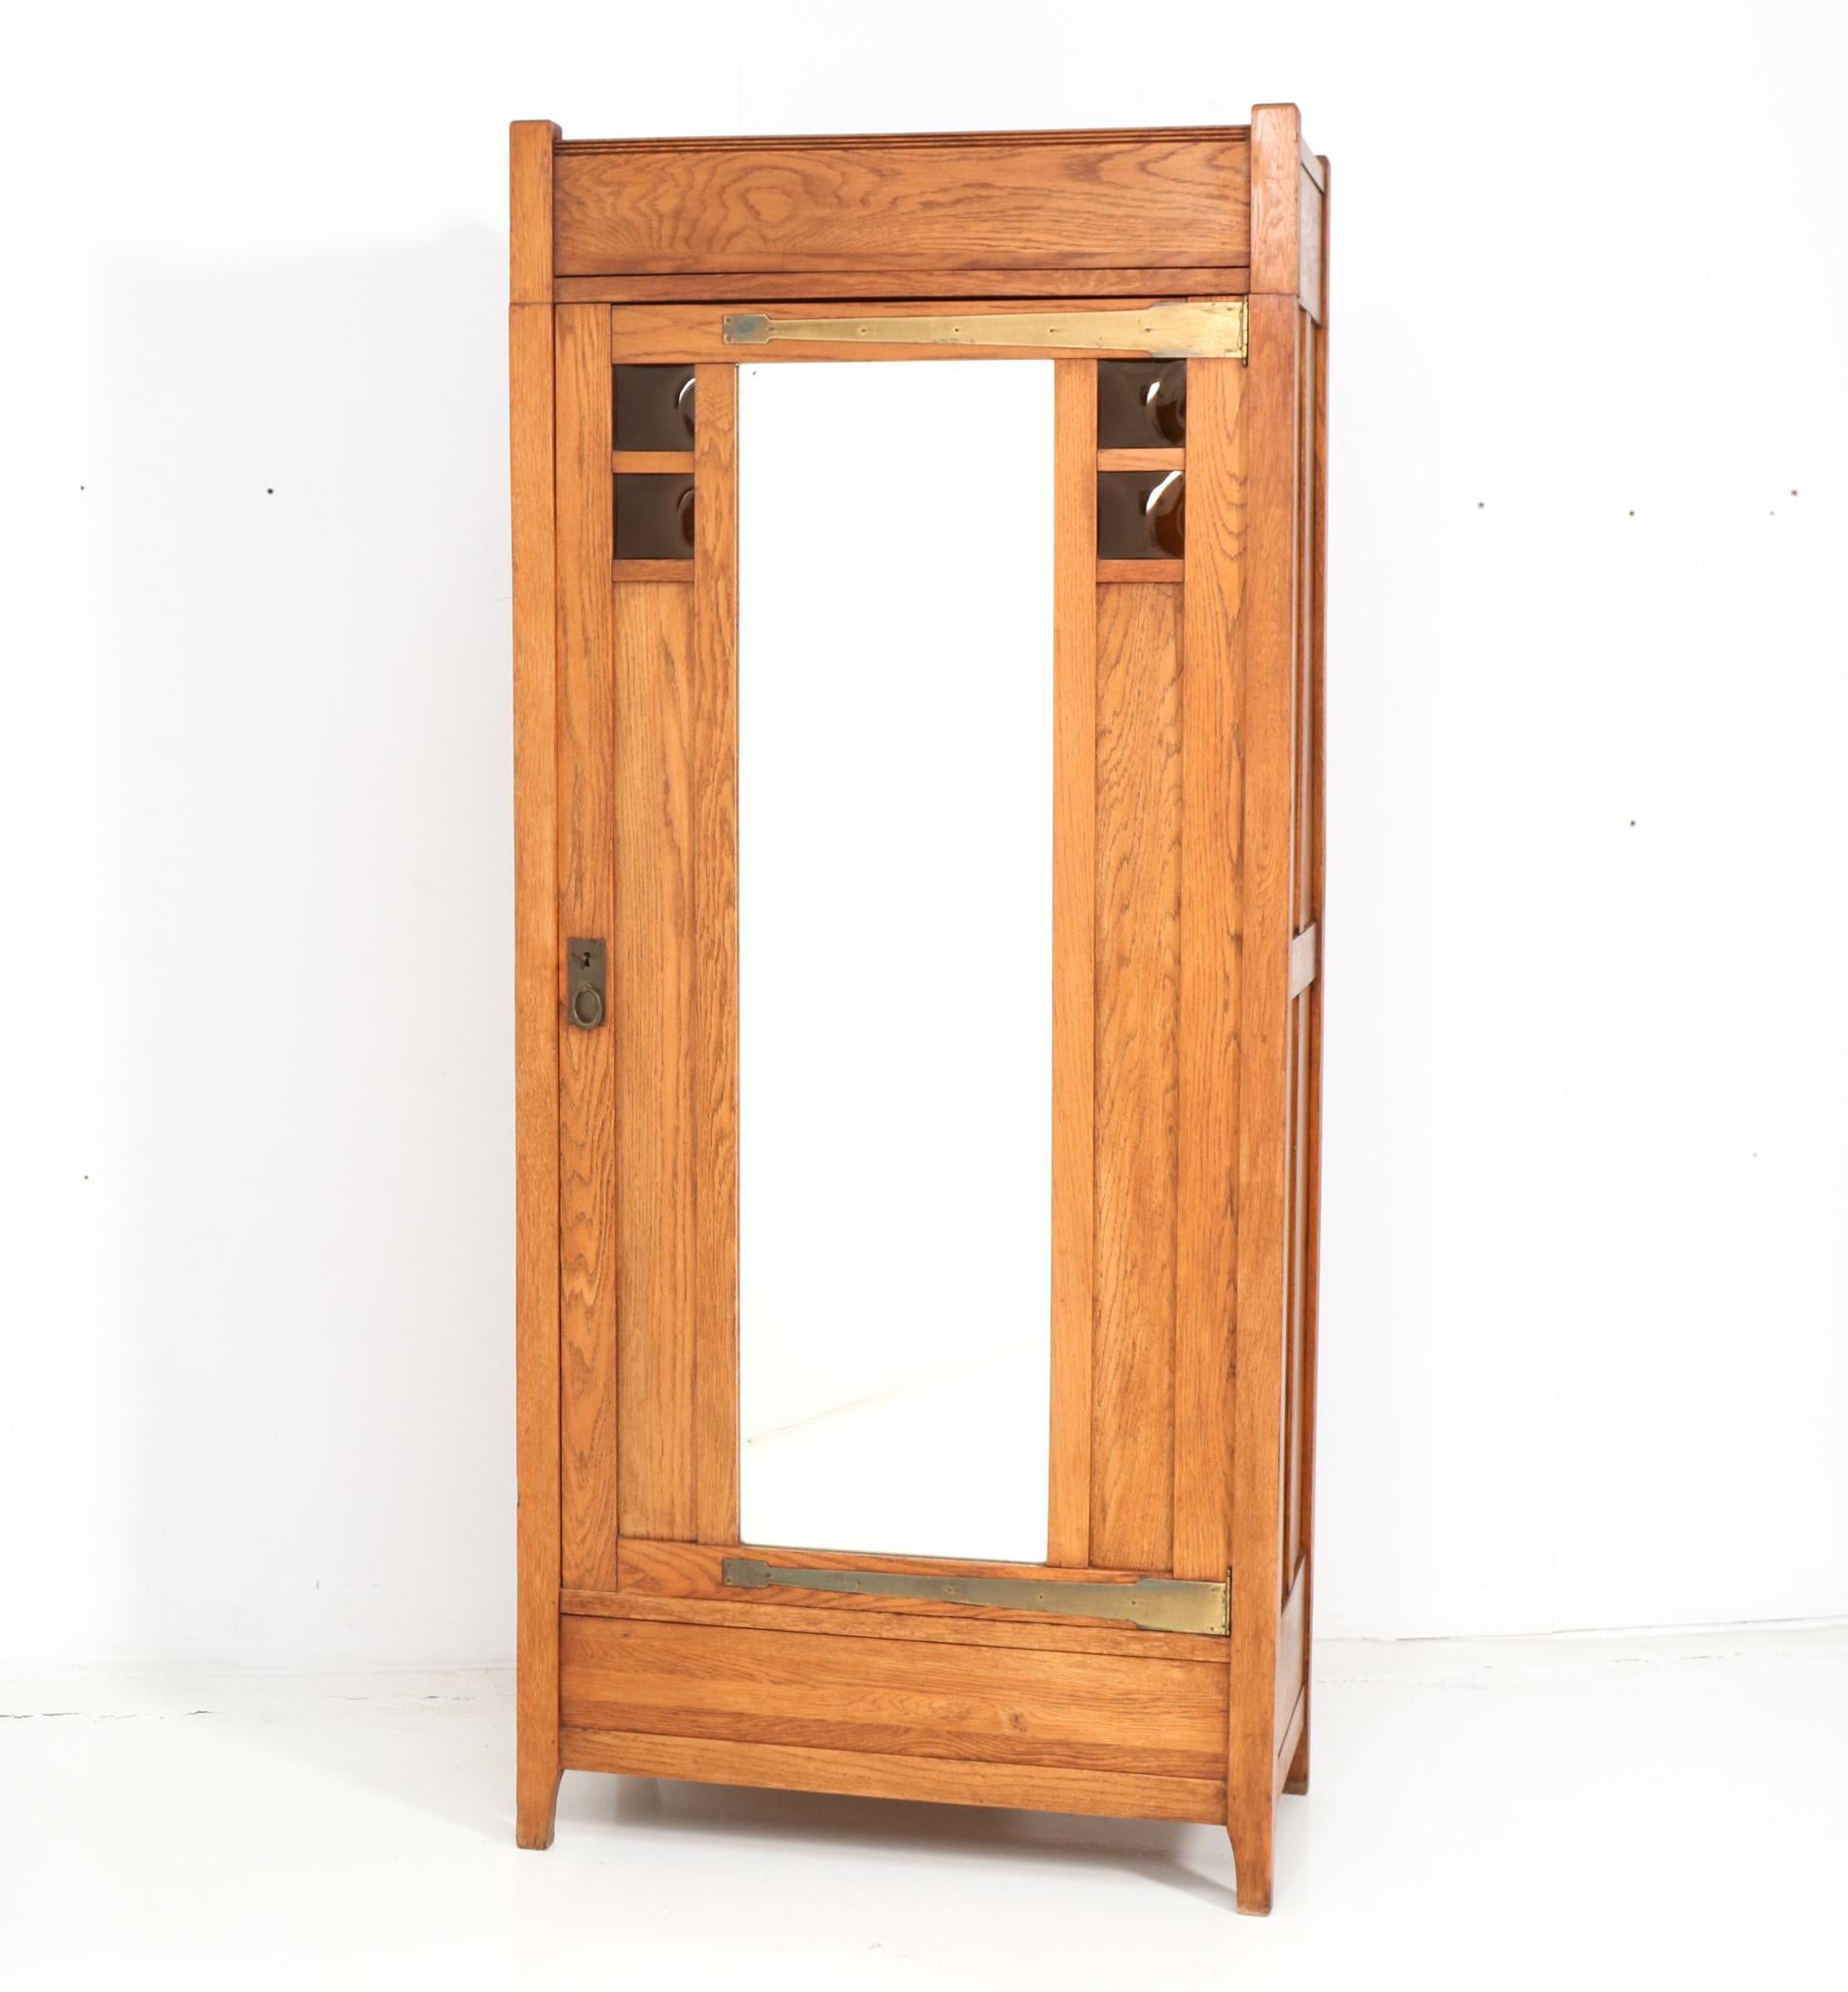 Amazing and rare Arts & Crafts Art Nouveau armoire or wardrobe.
Striking Dutch design from the 1900s.
Solid oak with original colored glass.
The door has still got the original mirrored glass.
Three stained beech shelves which are adjustable in